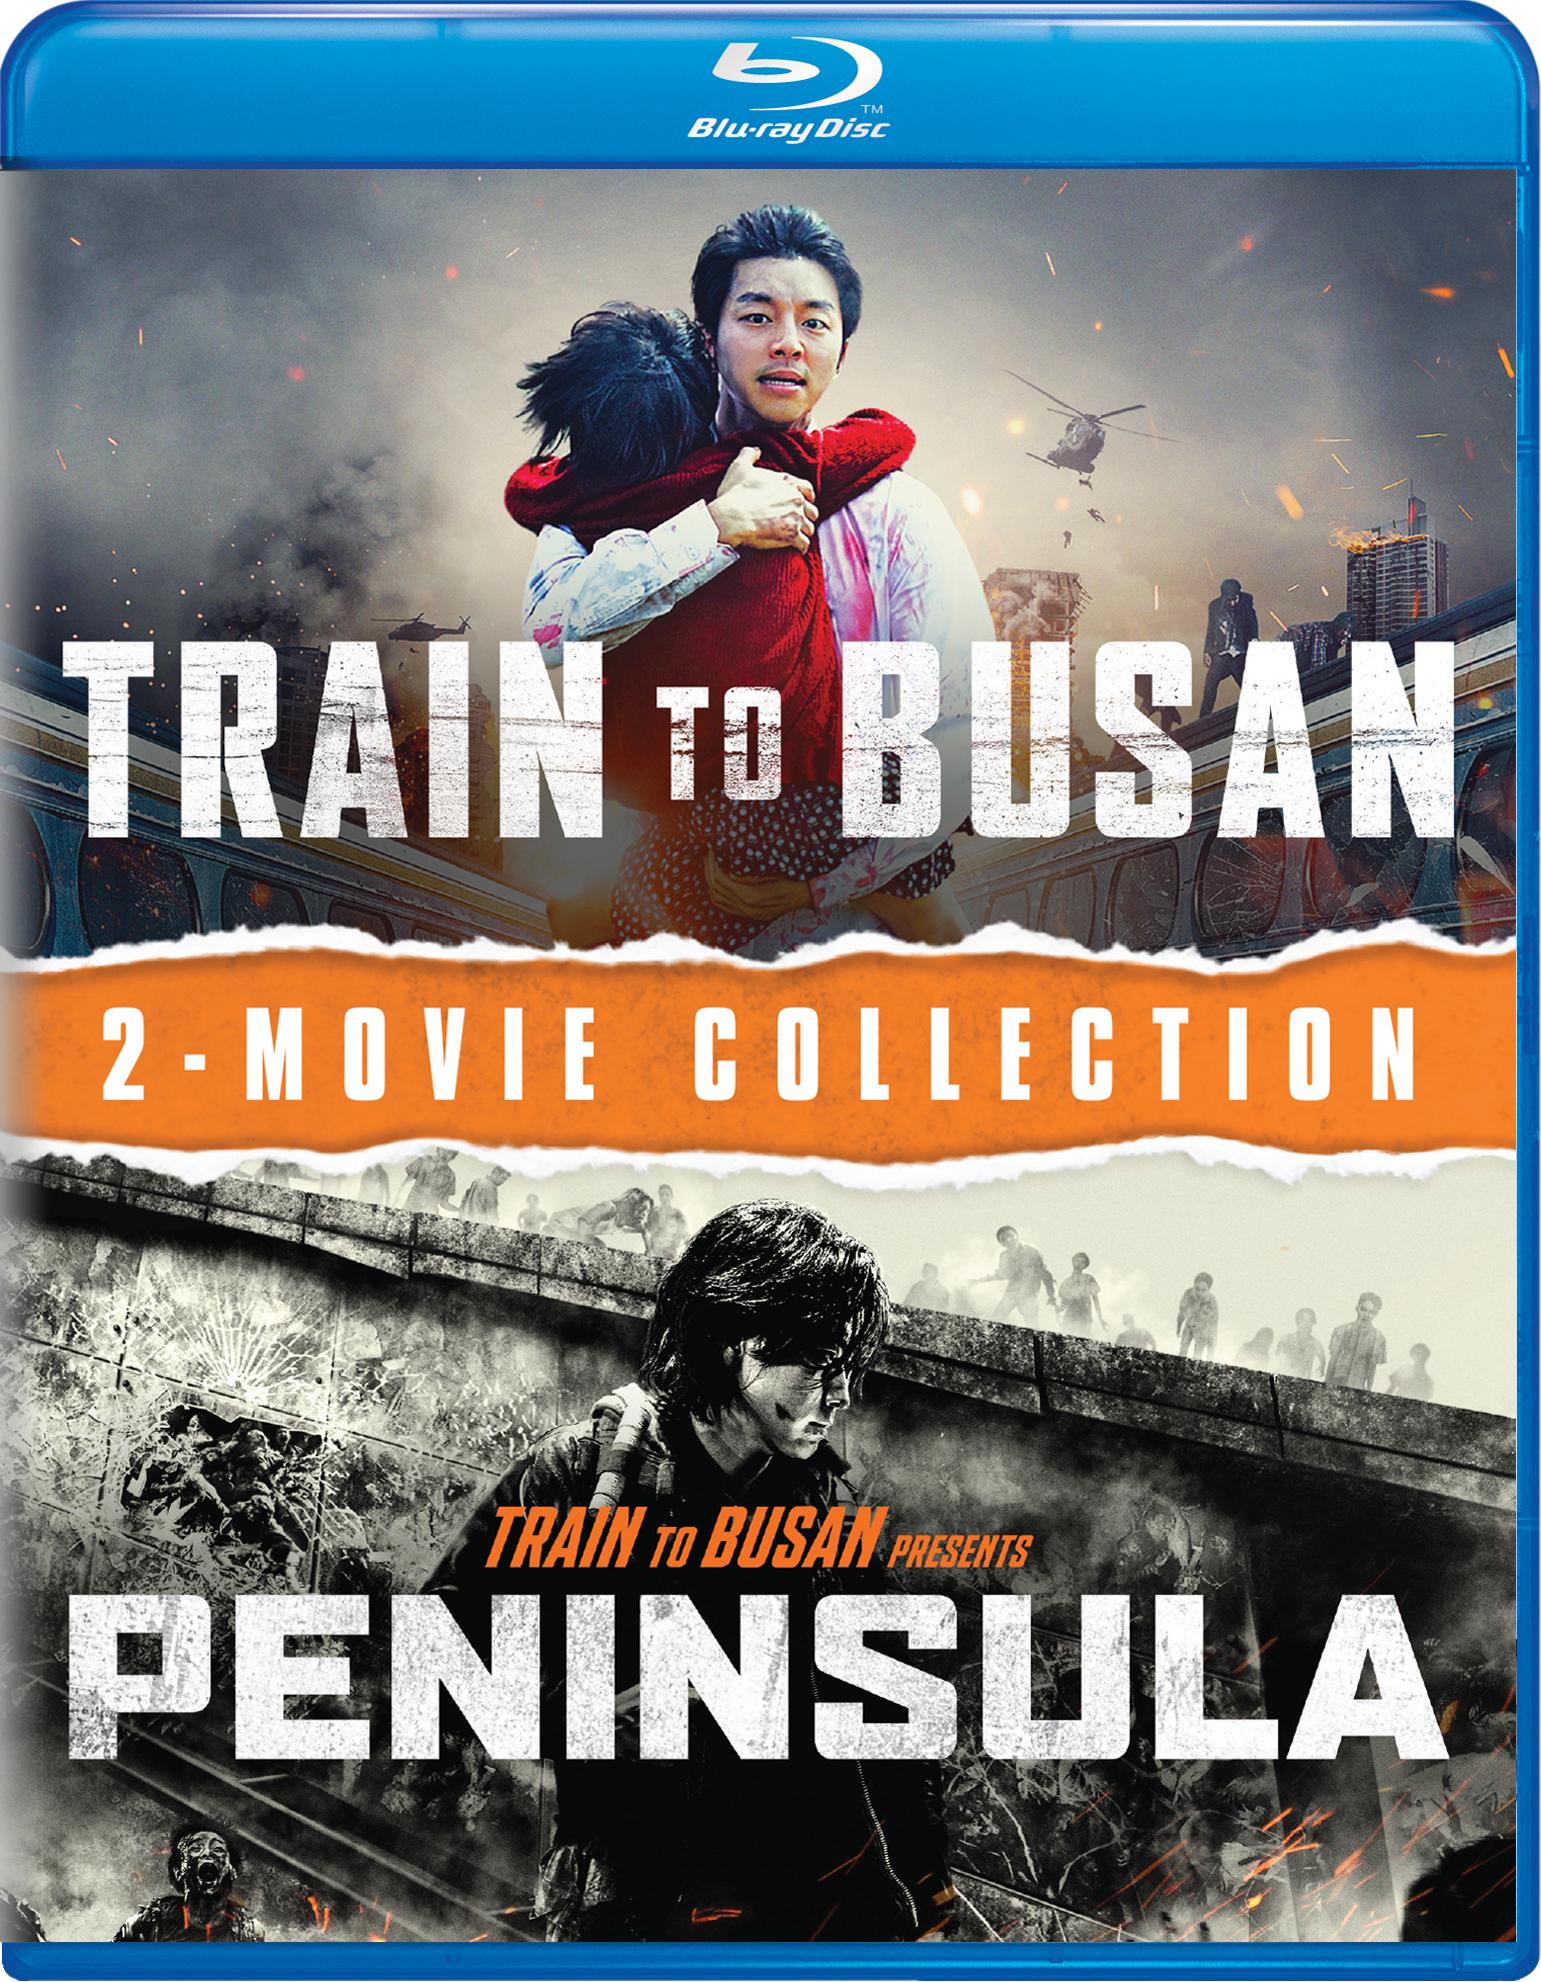 Train To Busan/Train To Busan Presents - Peninsula (Blu-ray Double Feature) - Blu-ray [ 2020 ]  - Foreign Movies On Blu-ray - Movies On GRUV